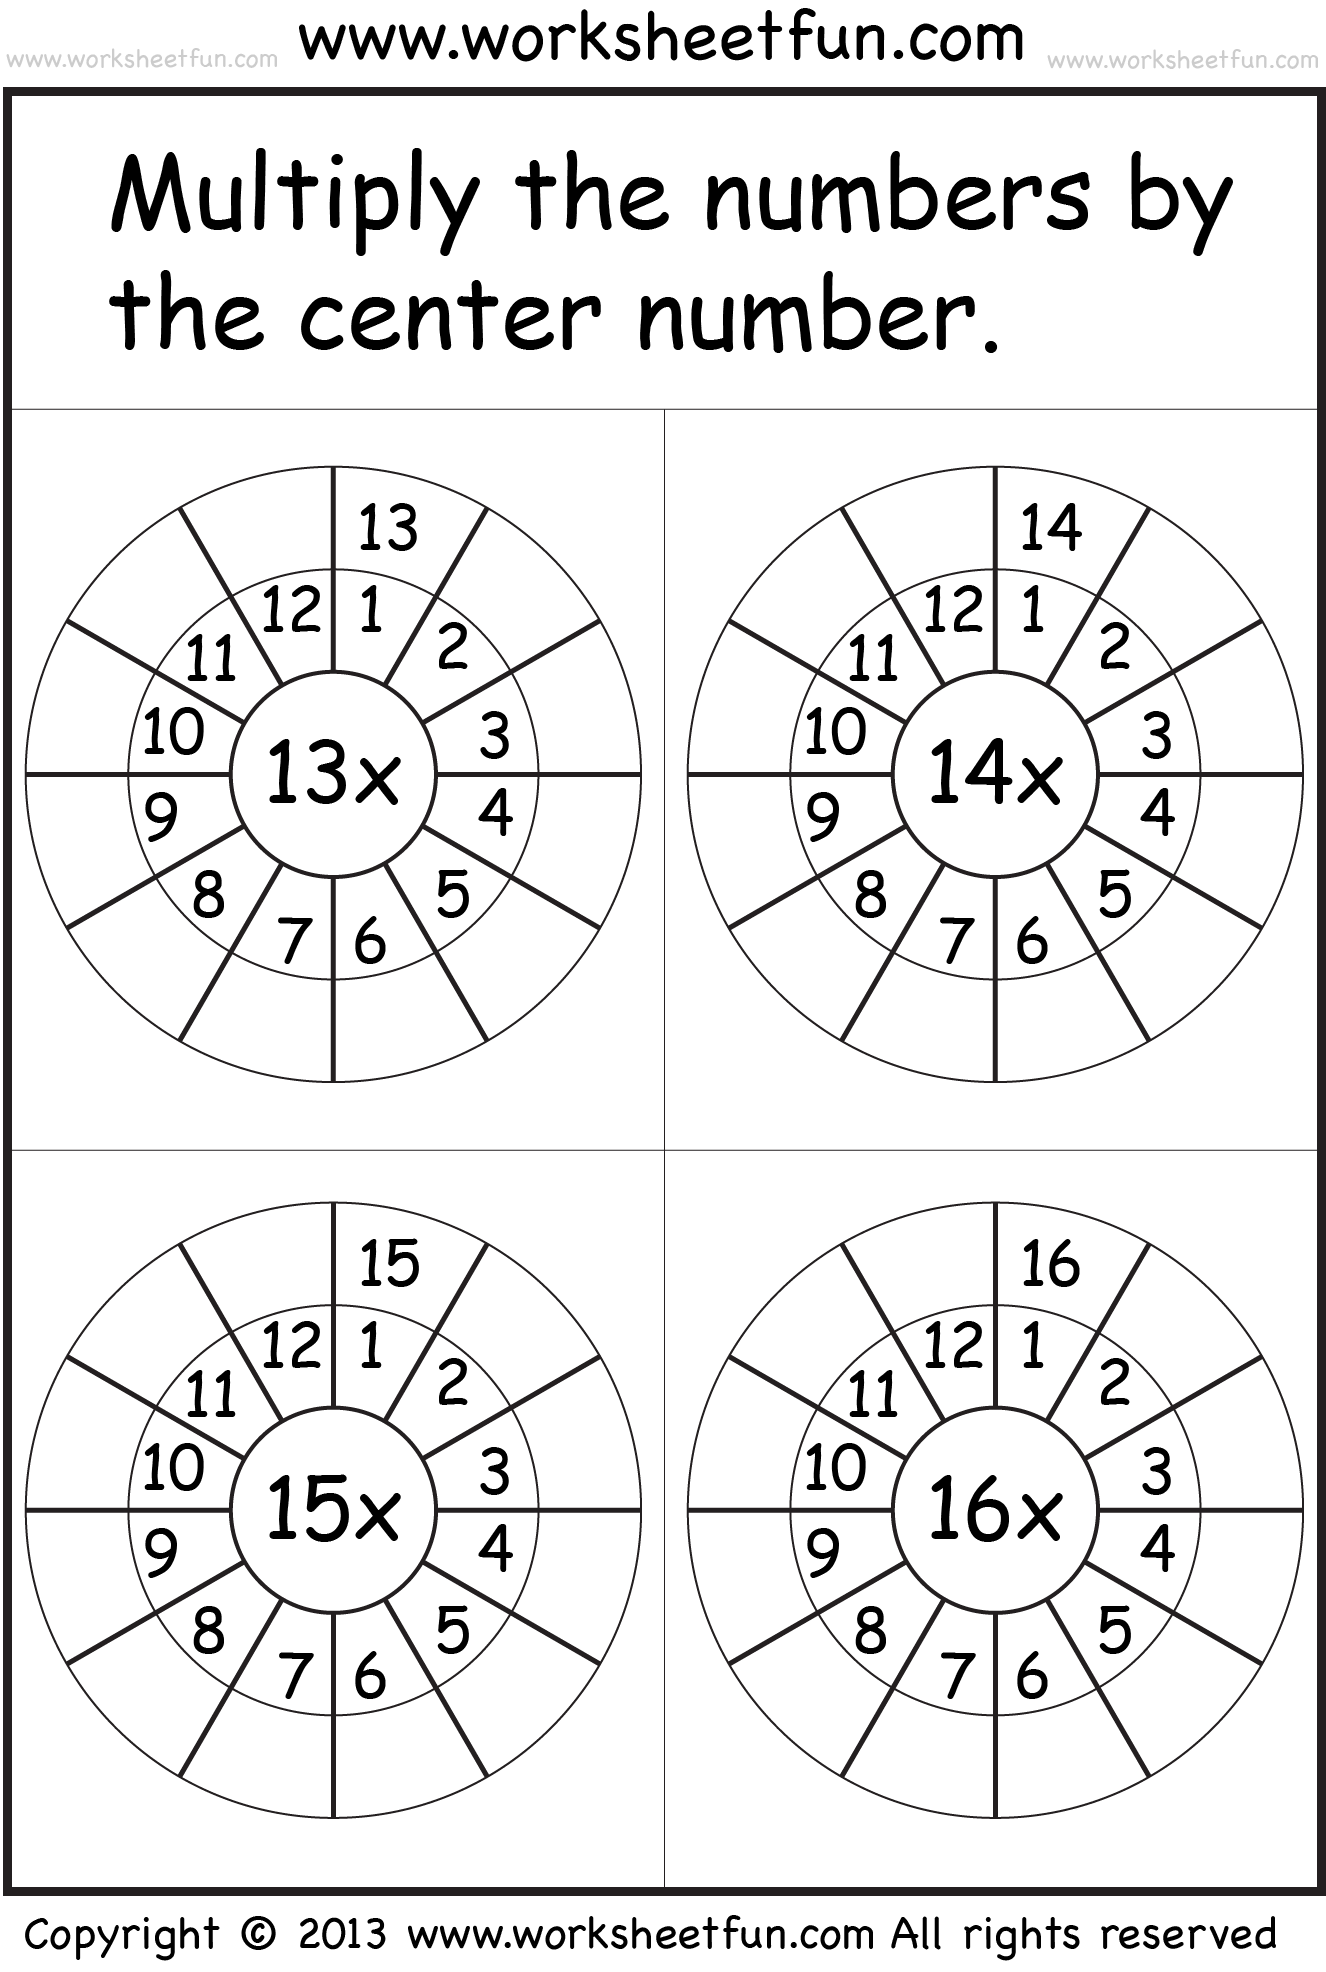 Times Table Worksheets 1, 2, 3, 4, 5, 6, 7, 8, 9, 10, 11, 12, 13, 14